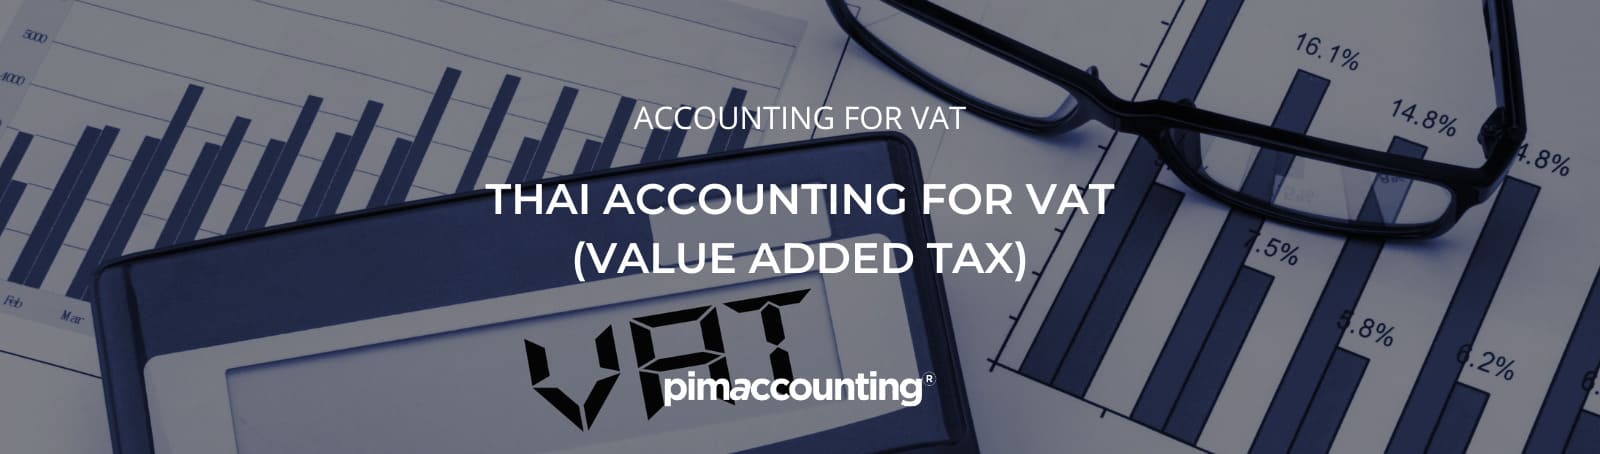 Thai accounting for VAT (Value Added Tax)